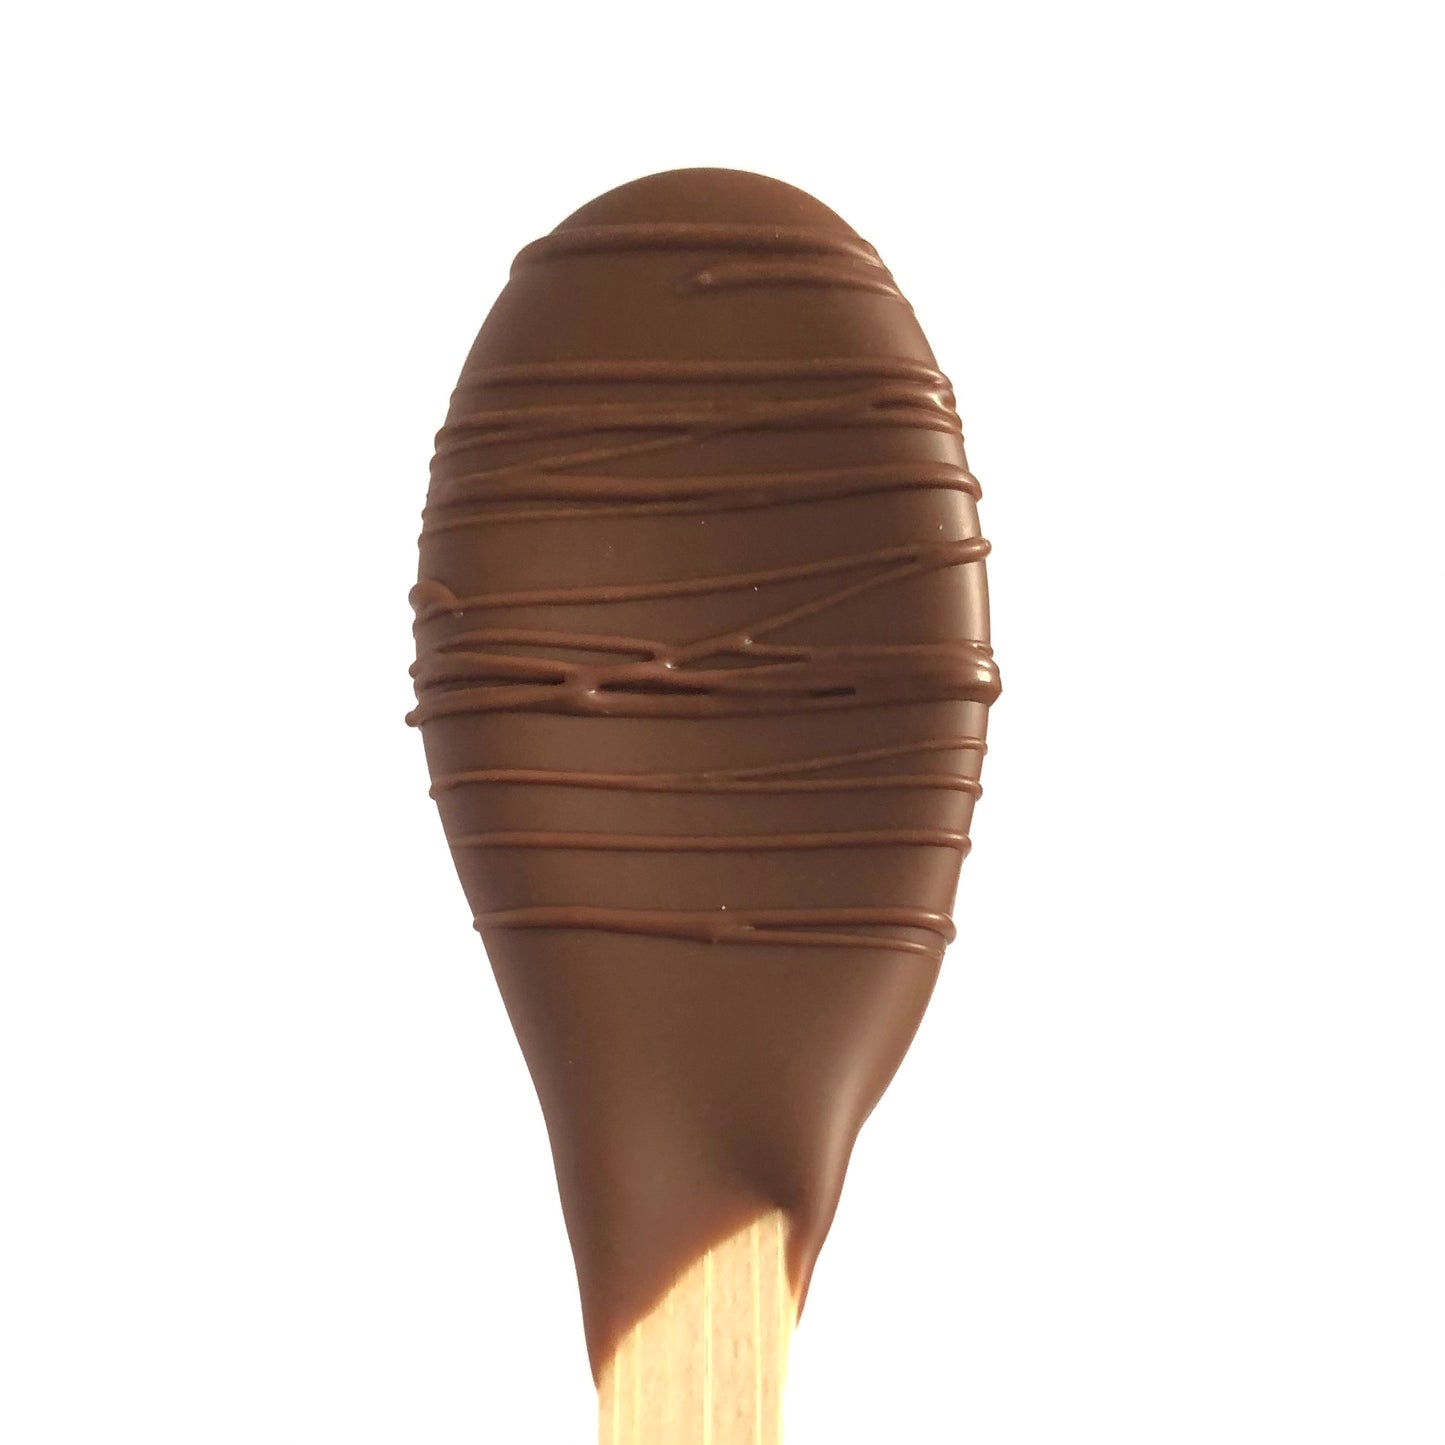 Chocolate covered spoons - Assorted flavours